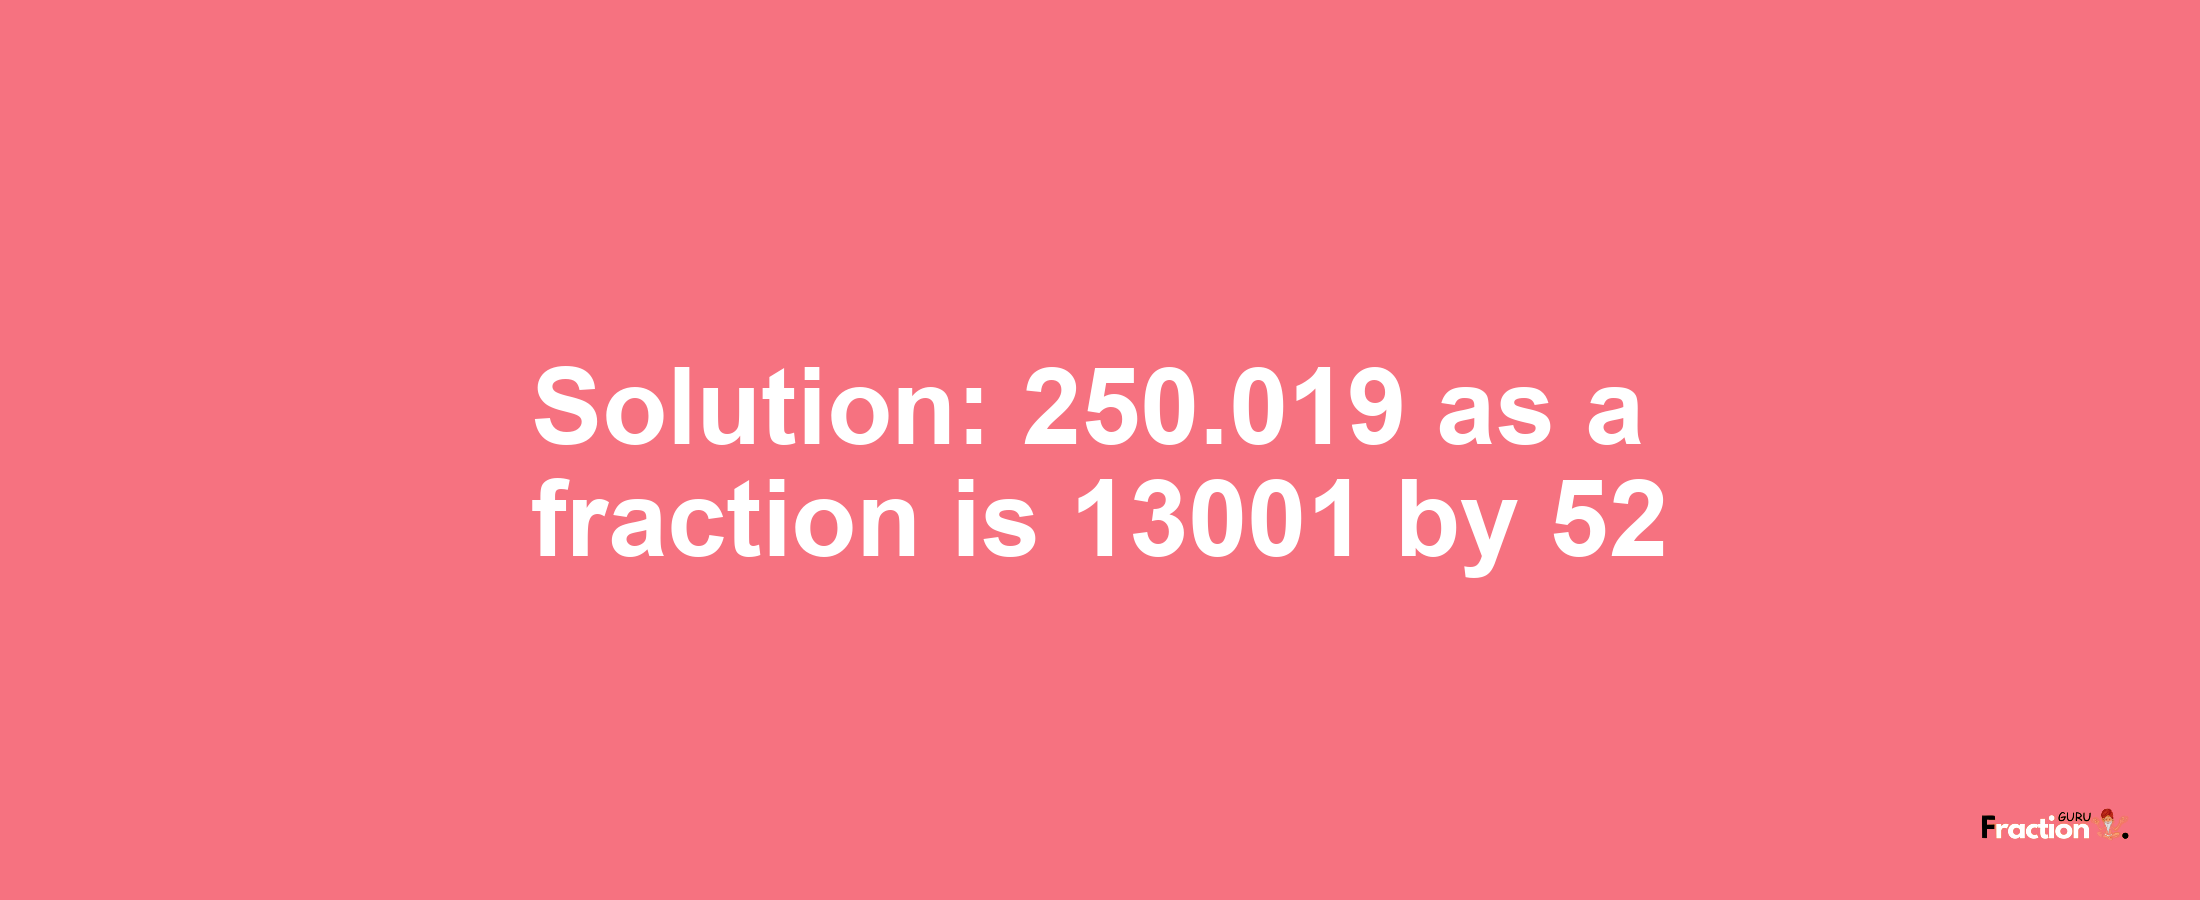 Solution:250.019 as a fraction is 13001/52